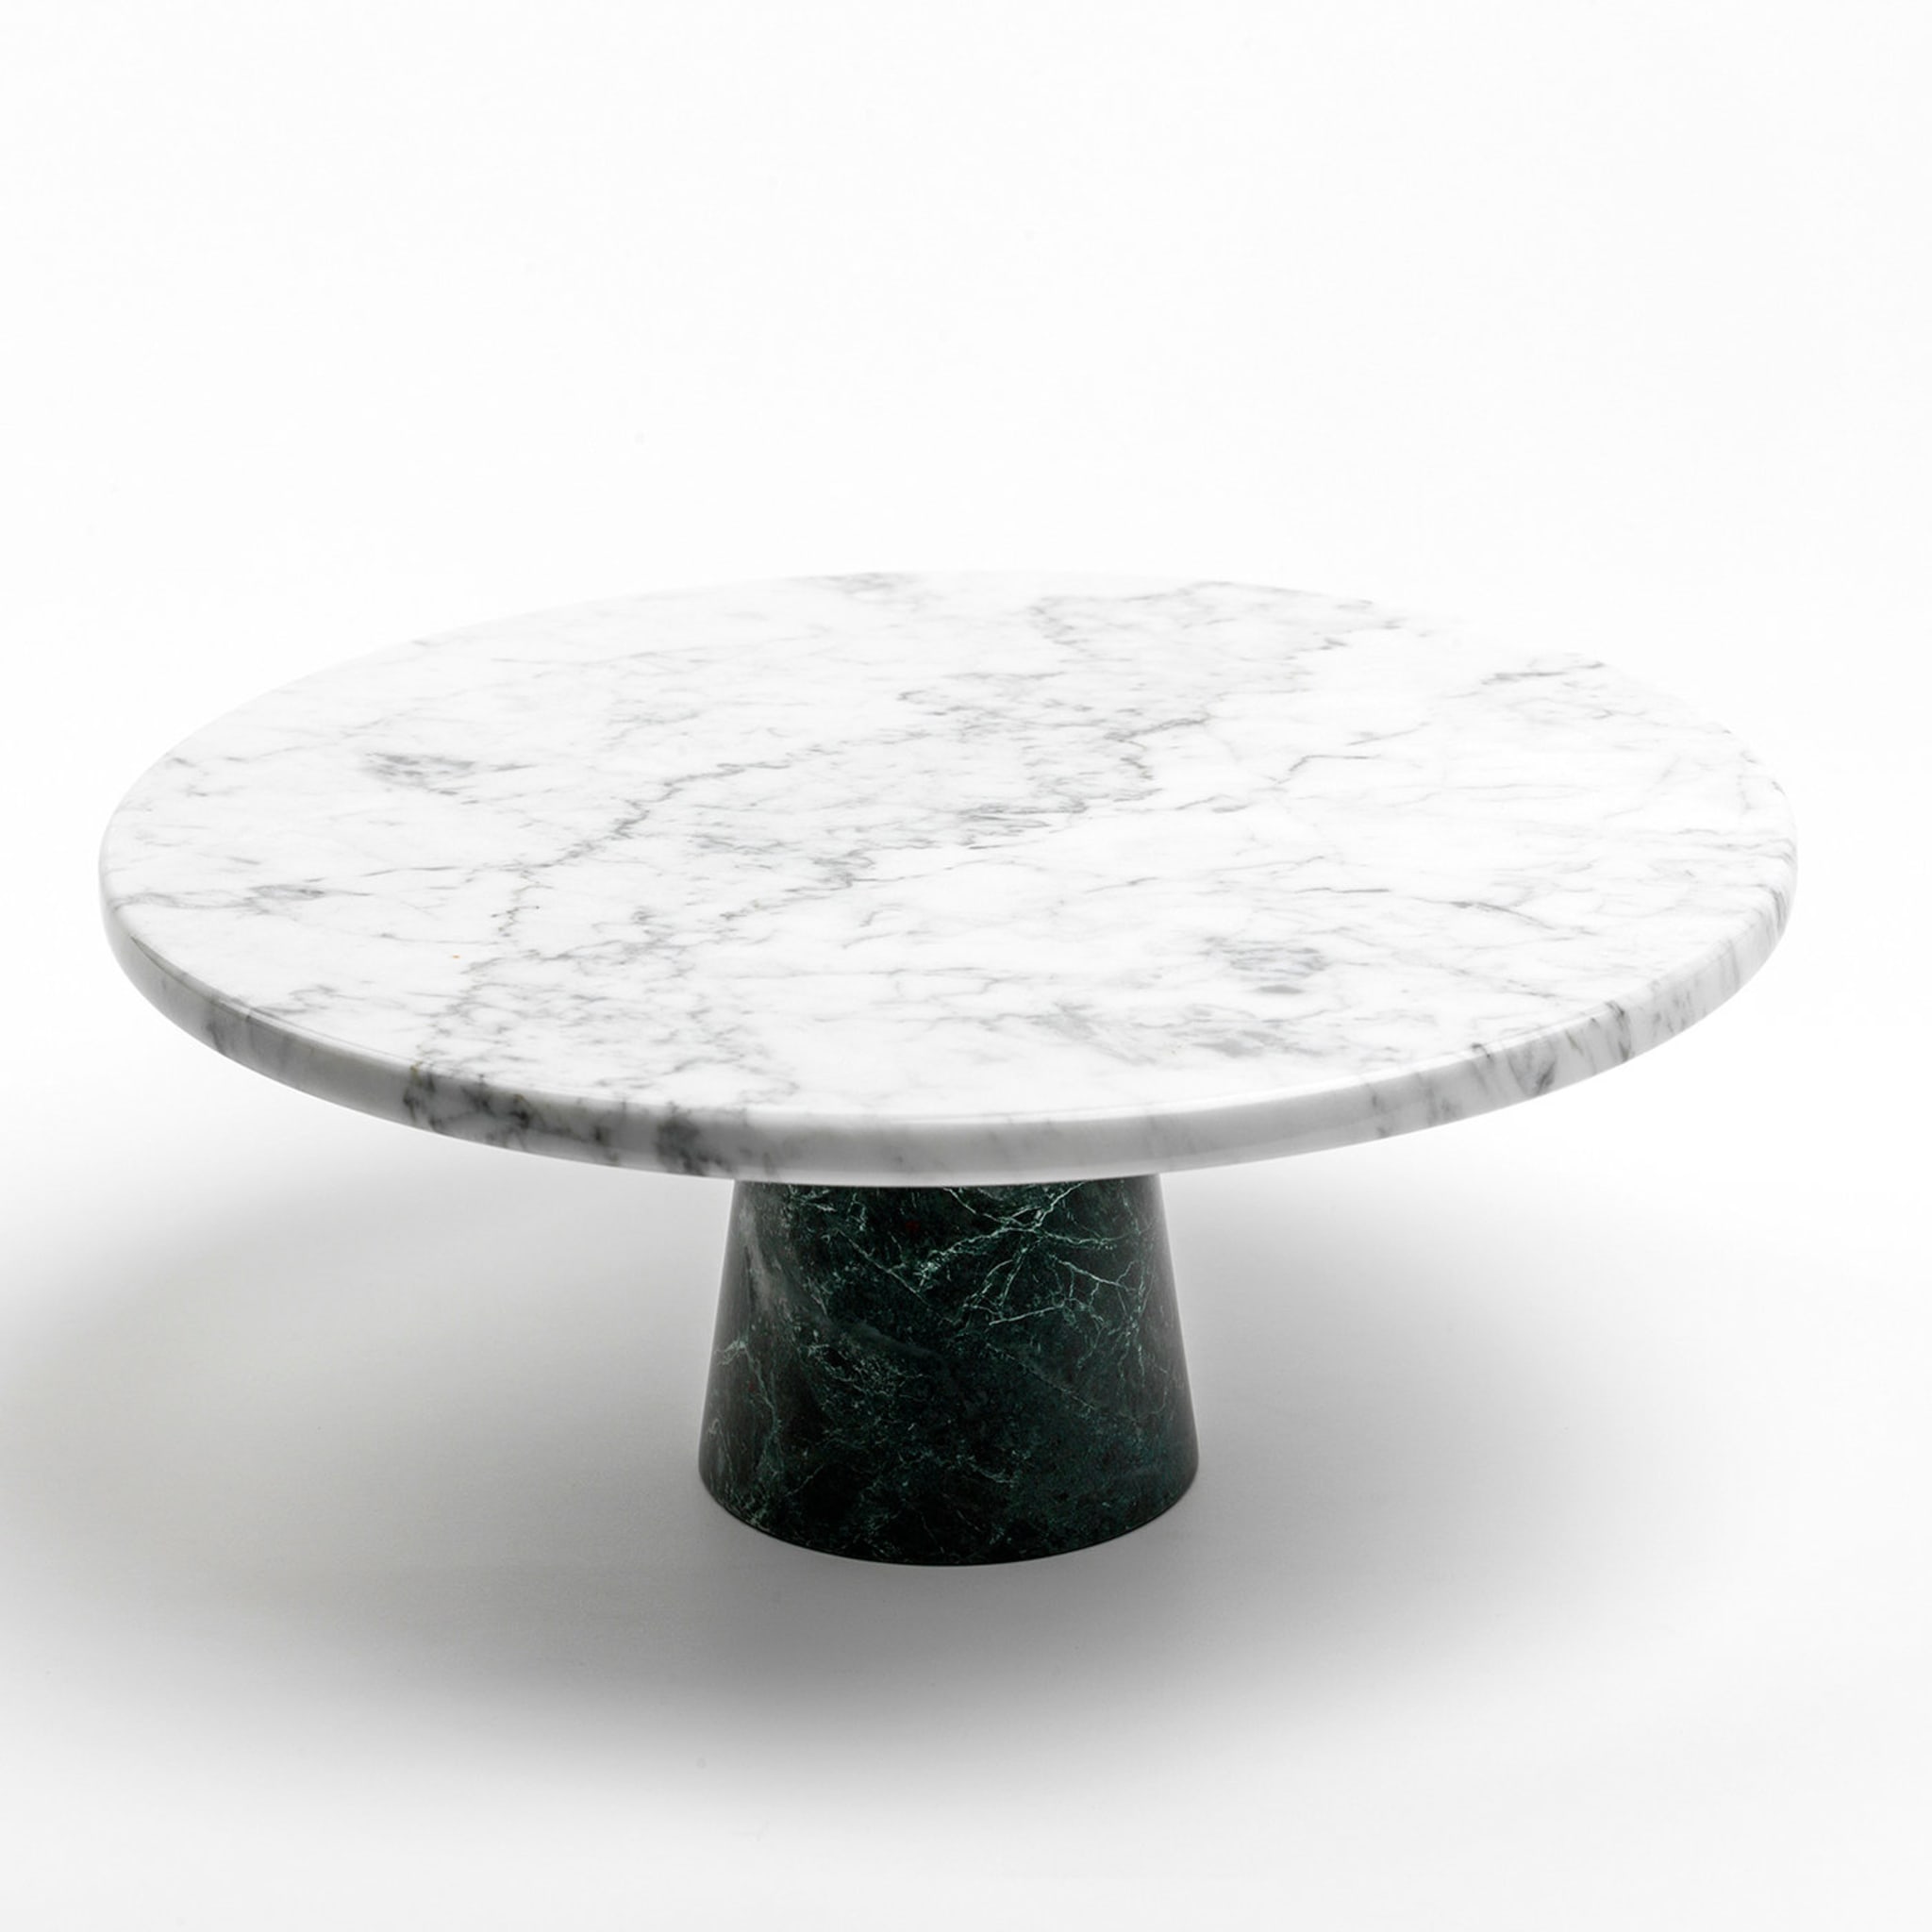 White Marble Cake Stand with Black Base - Alternative view 1